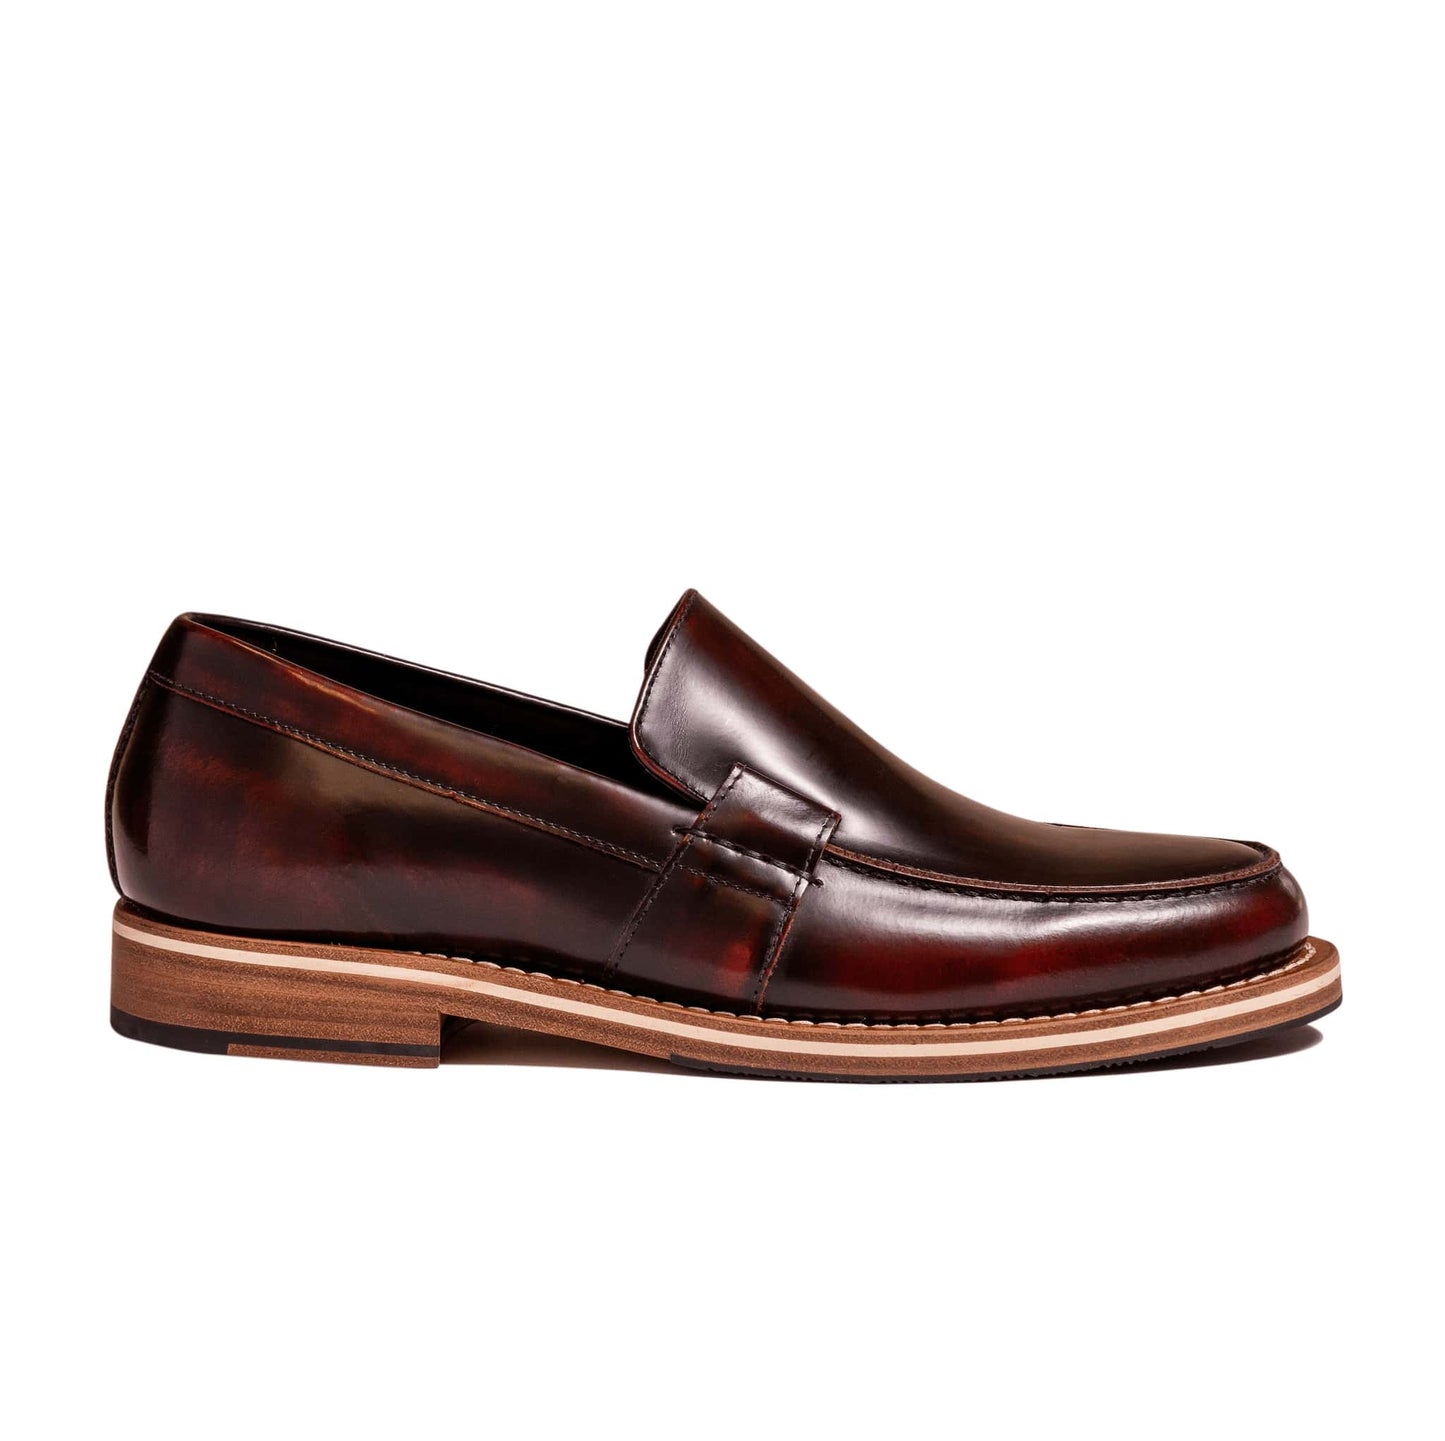 HELM Shoes The Wilson Burgundy